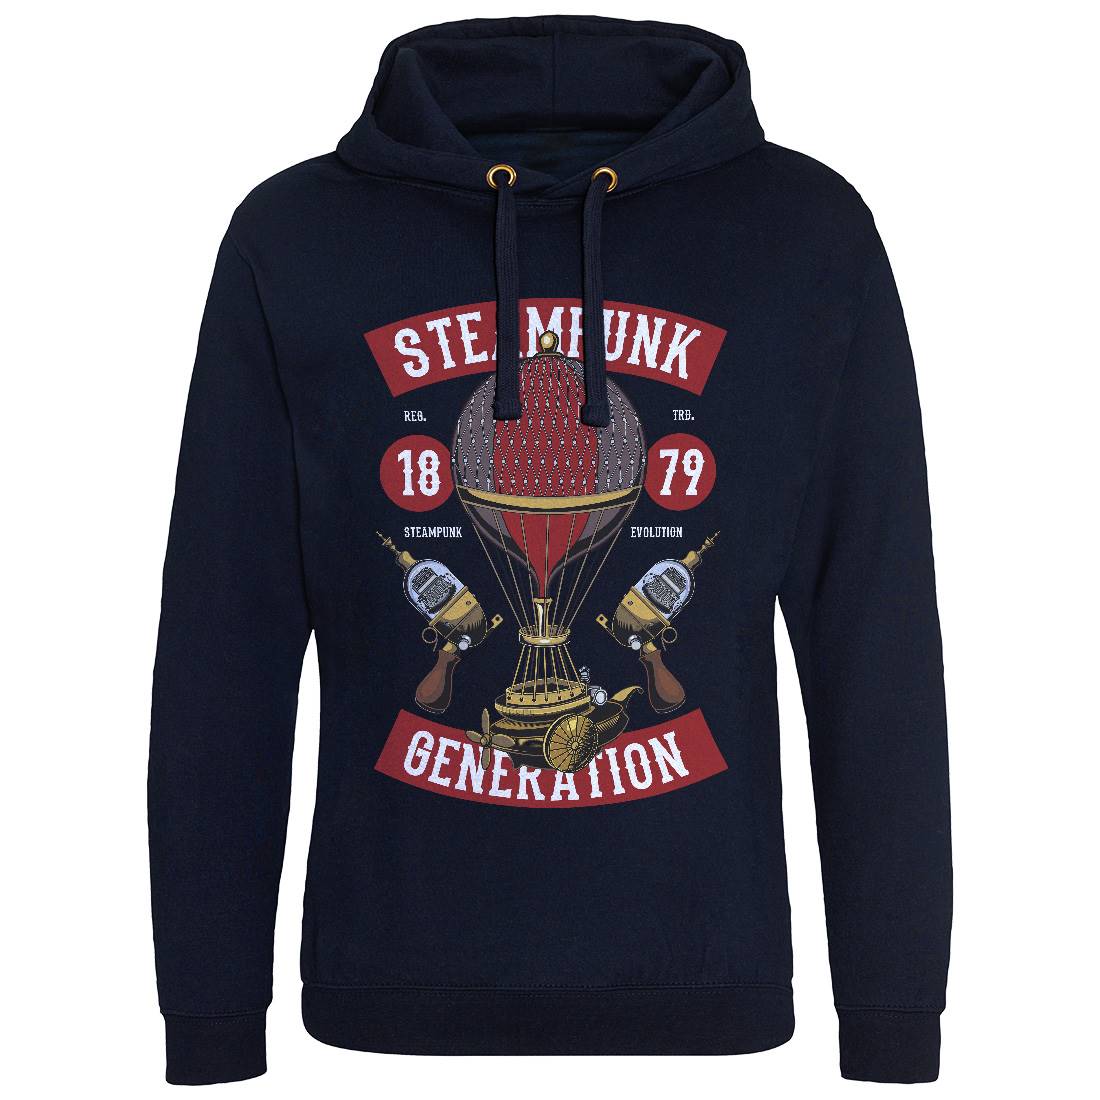 Generation Mens Hoodie Without Pocket Steampunk C449